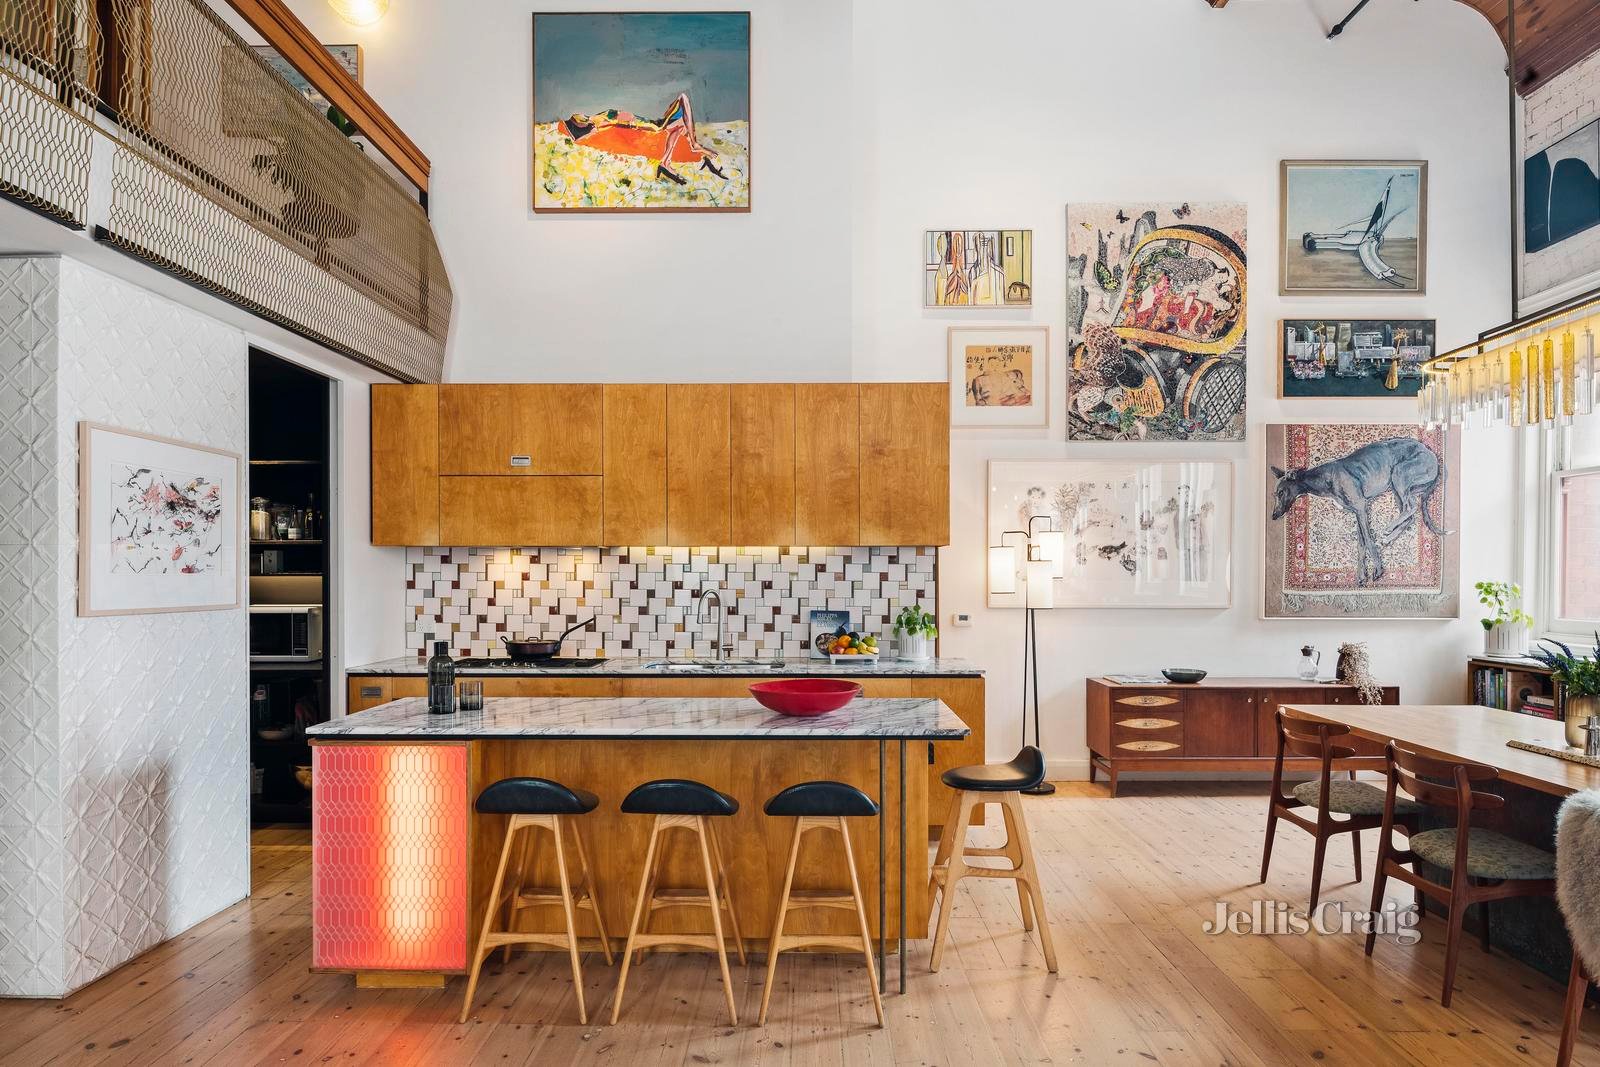 This New York-Style Loft Apartment Is Quintessential Collingwood Cool